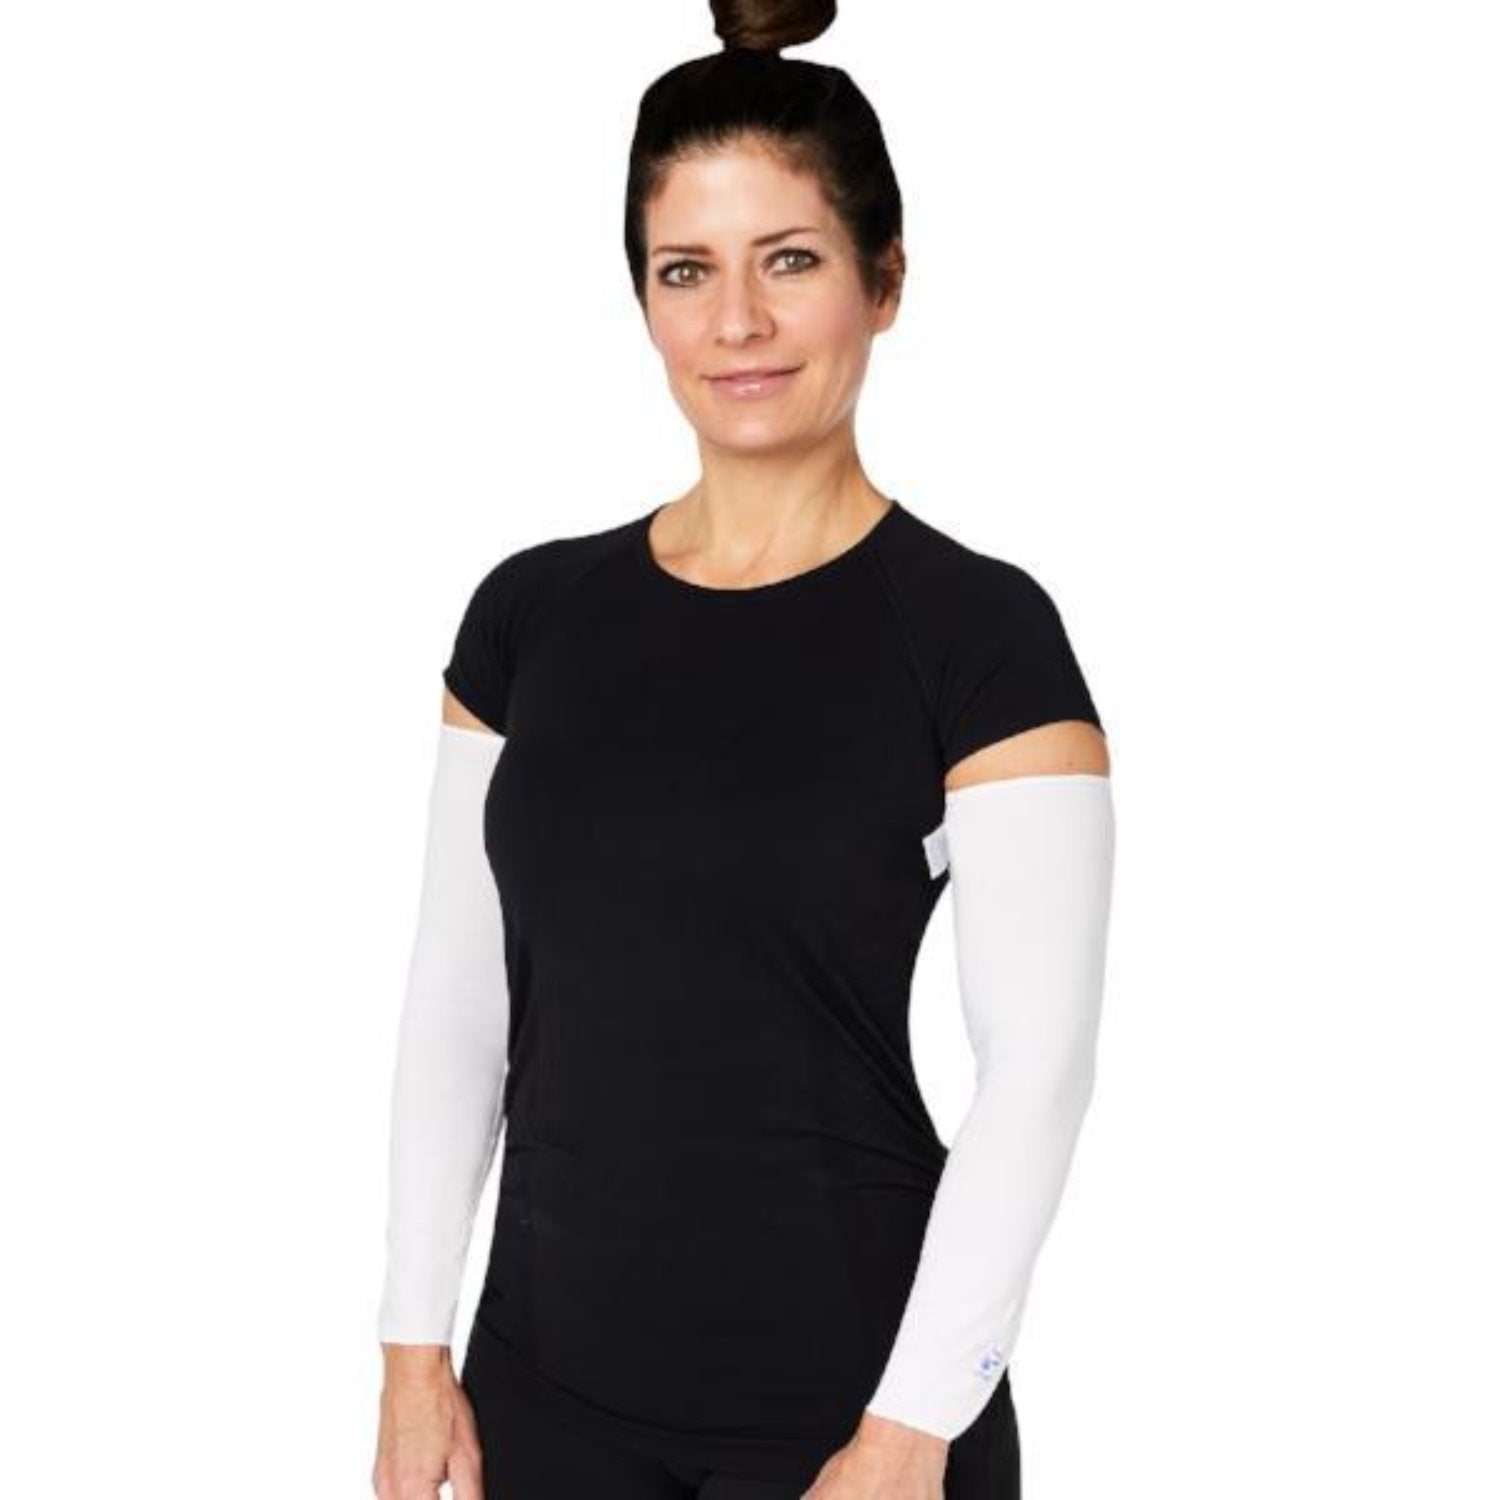 Smart textile arm sleeve will be an effective and easy-to-use